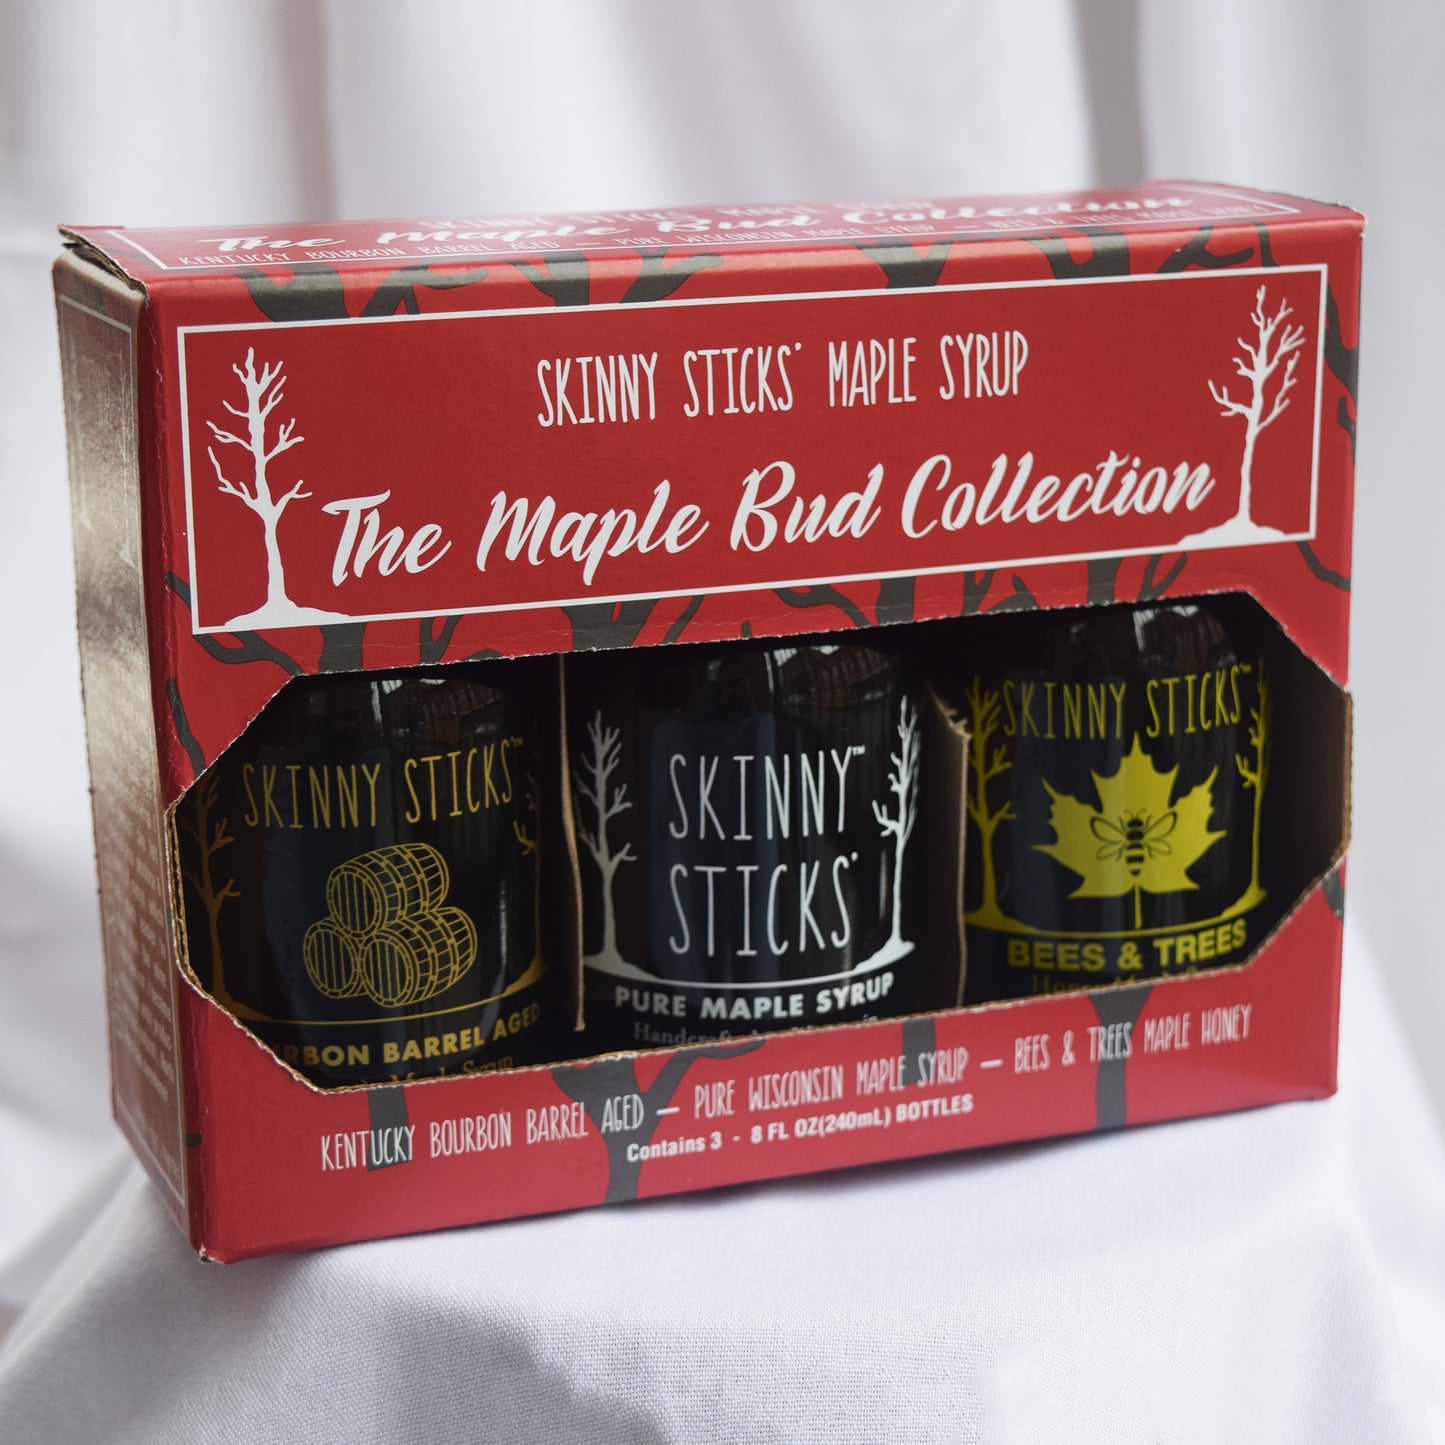 The Maple Bud Syrup Collection